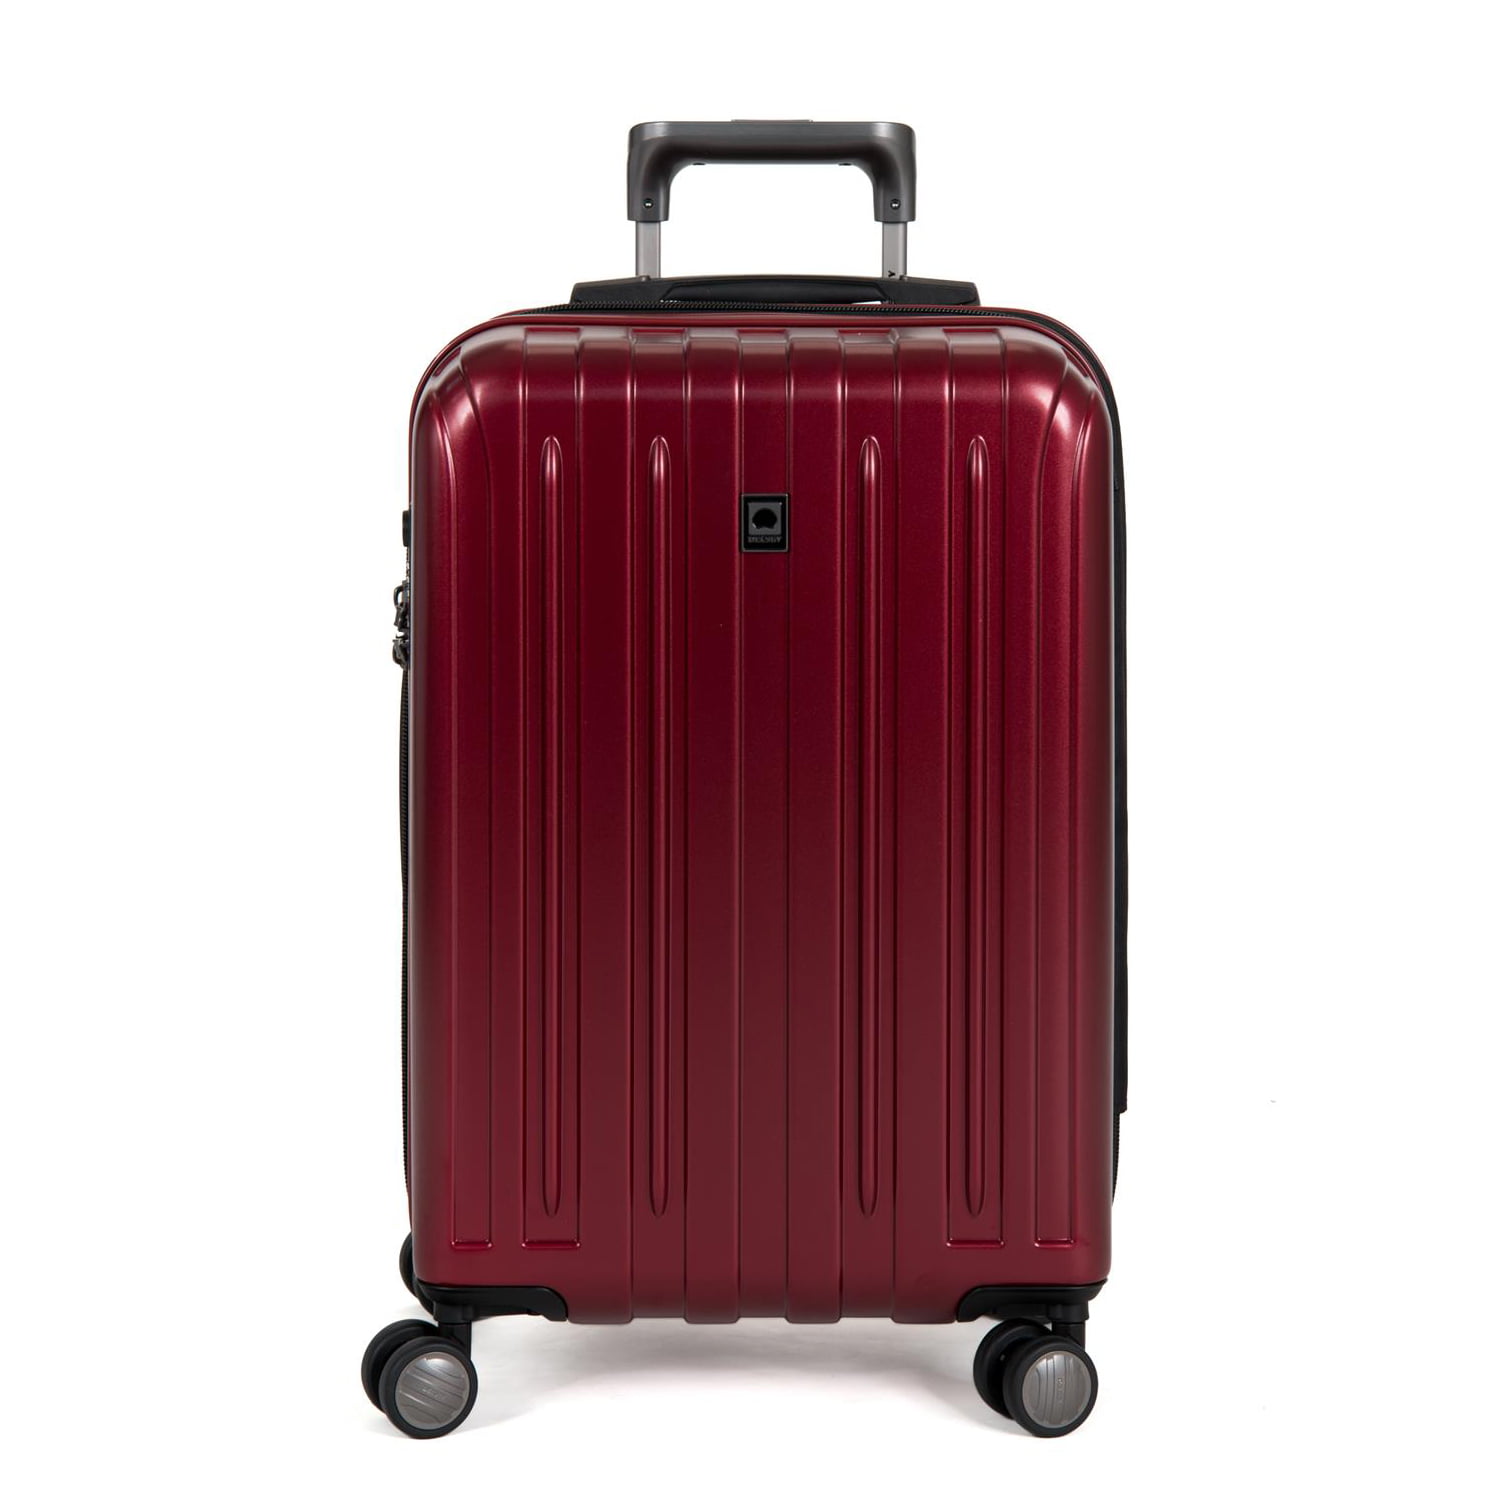 The Complete Guide to the Delsey Luggage Warranty - Luggage Unpacked